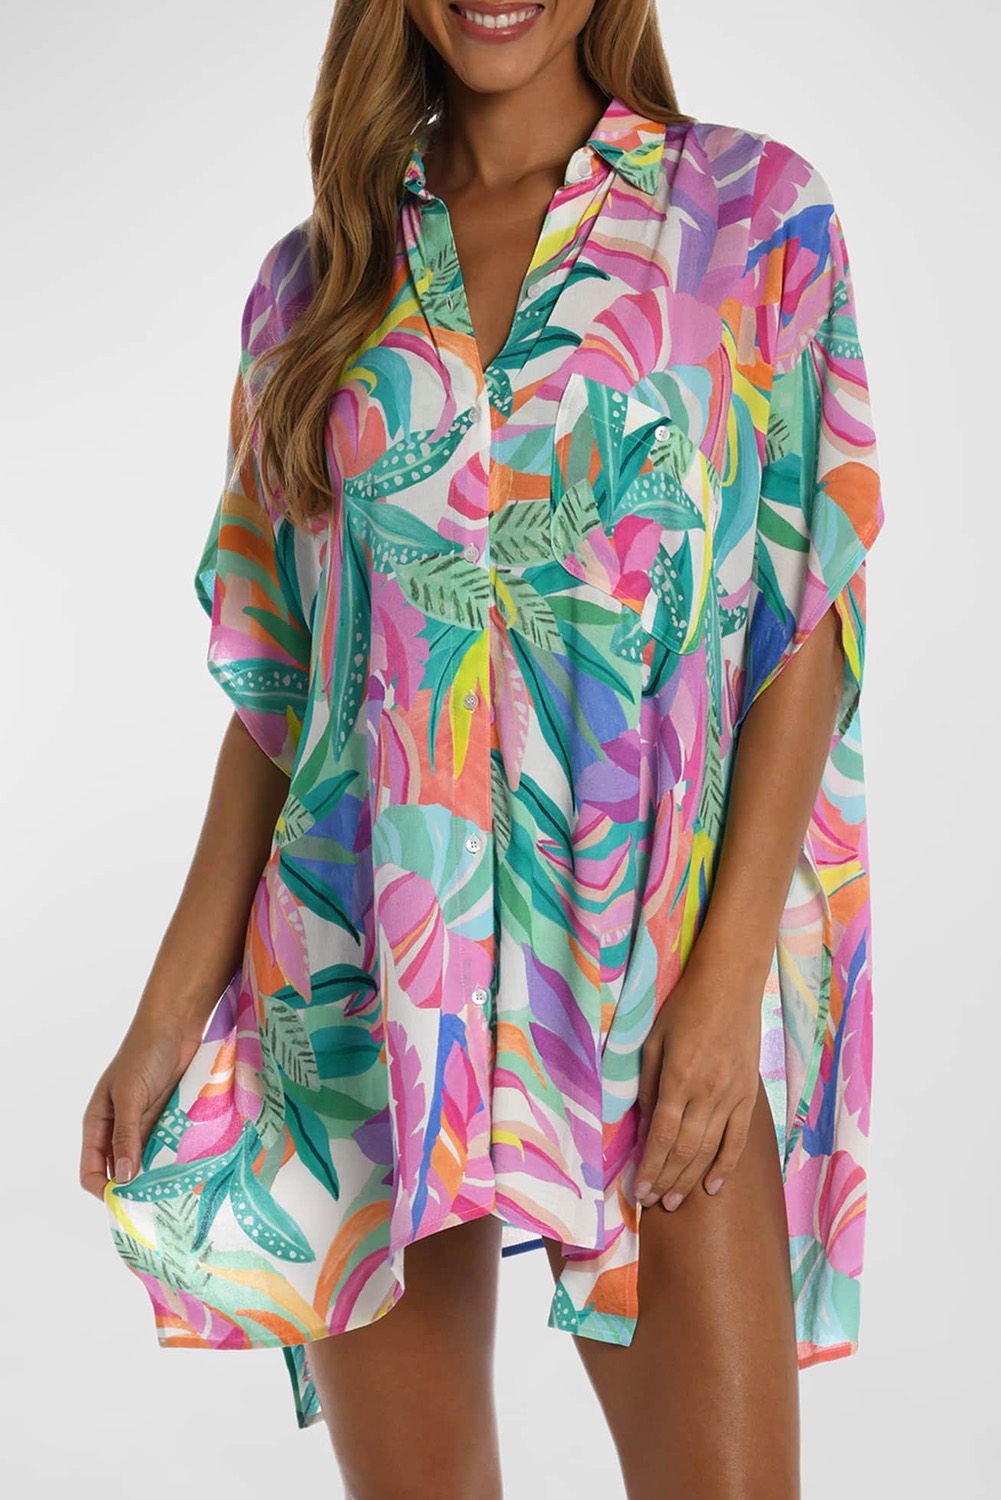 Shewin Wholesale CLOTHING Vendors Multicolor Tropical Print Button-up Short Sleeve Beach Cover Up